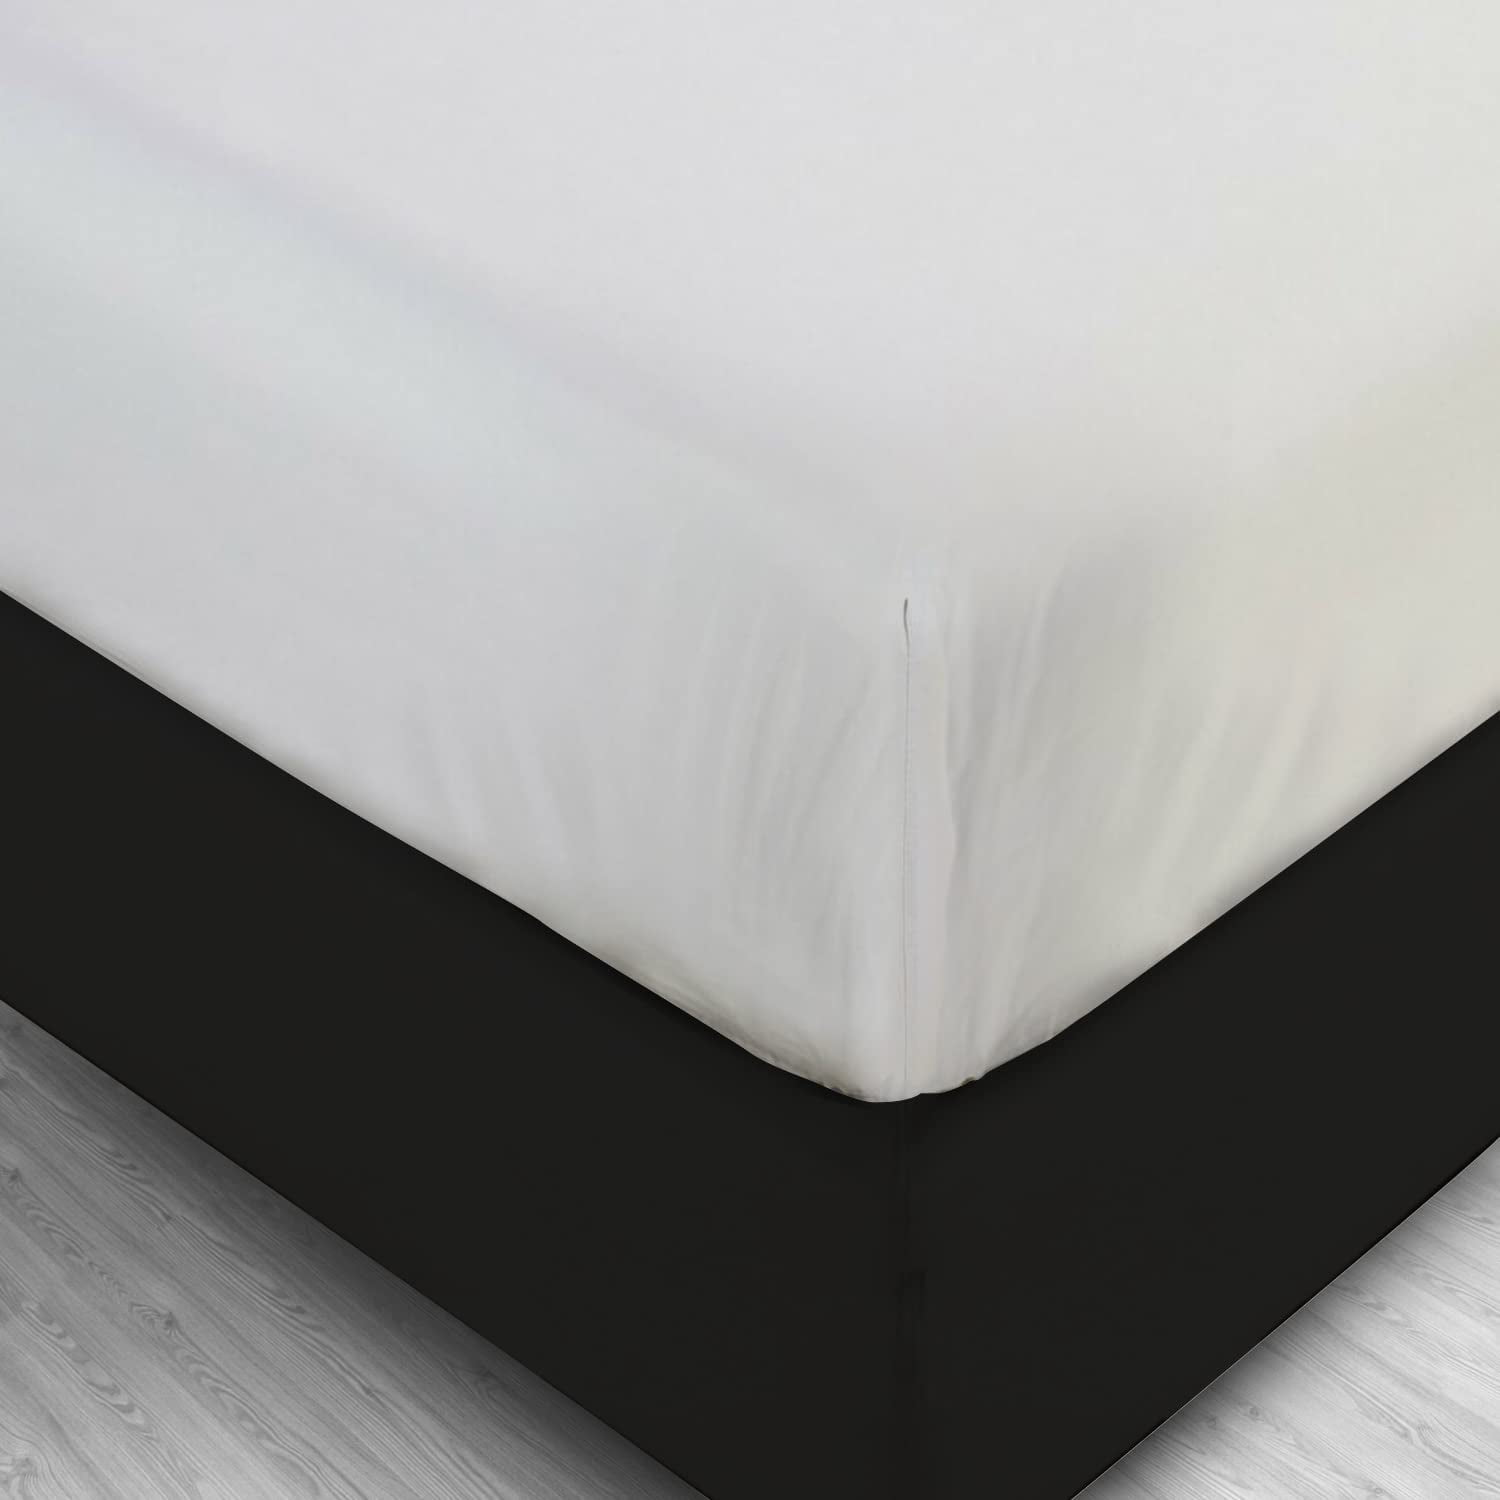 New Waterproof Mattress Protector Cover Fitted Sheet Bed Cover Vinyl Plastic UK 